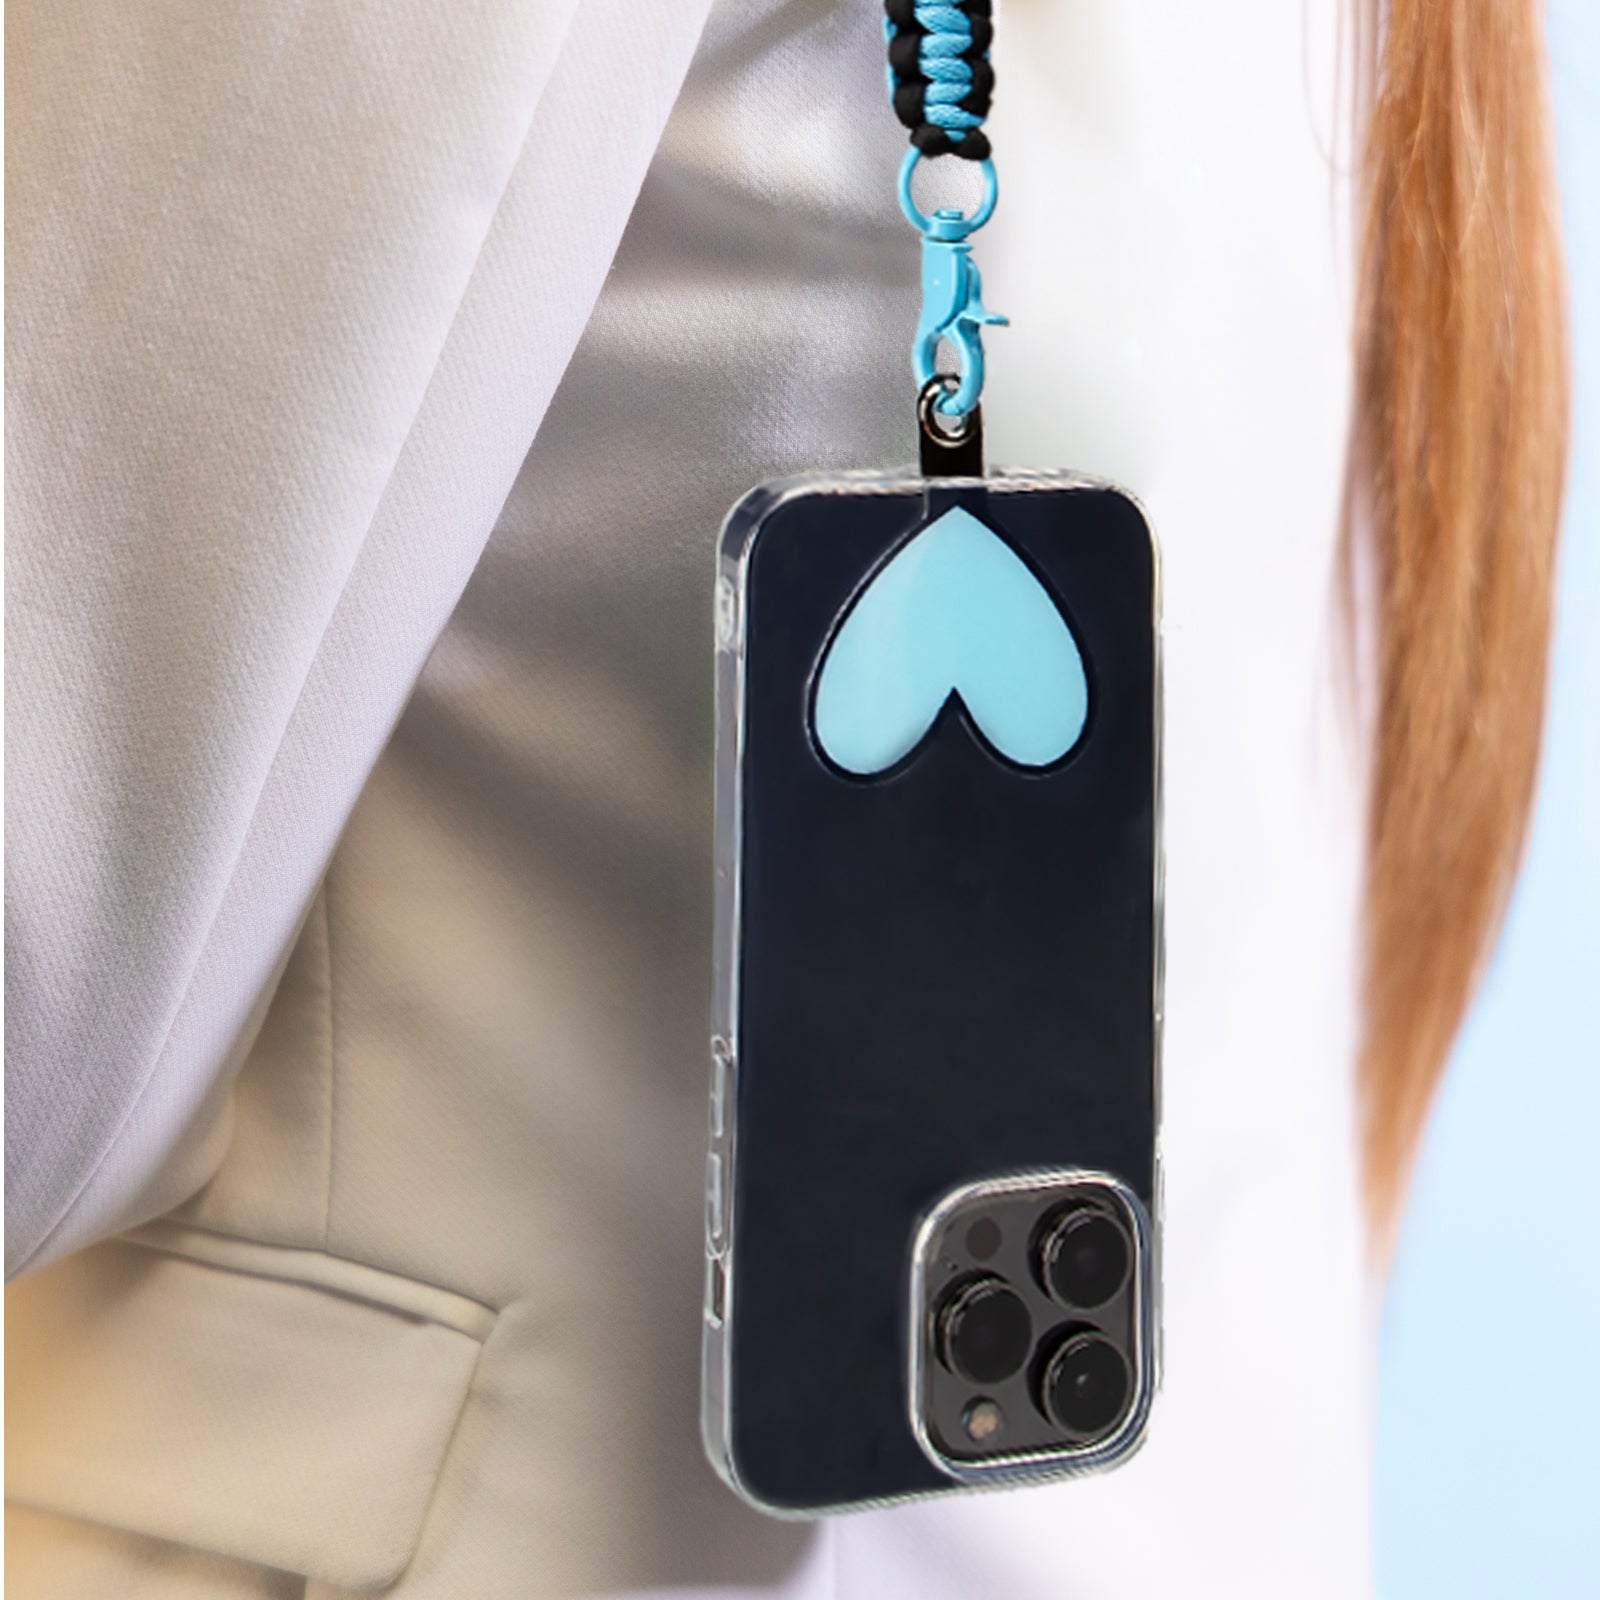 Heart-shaped universal neck strap for smartphones